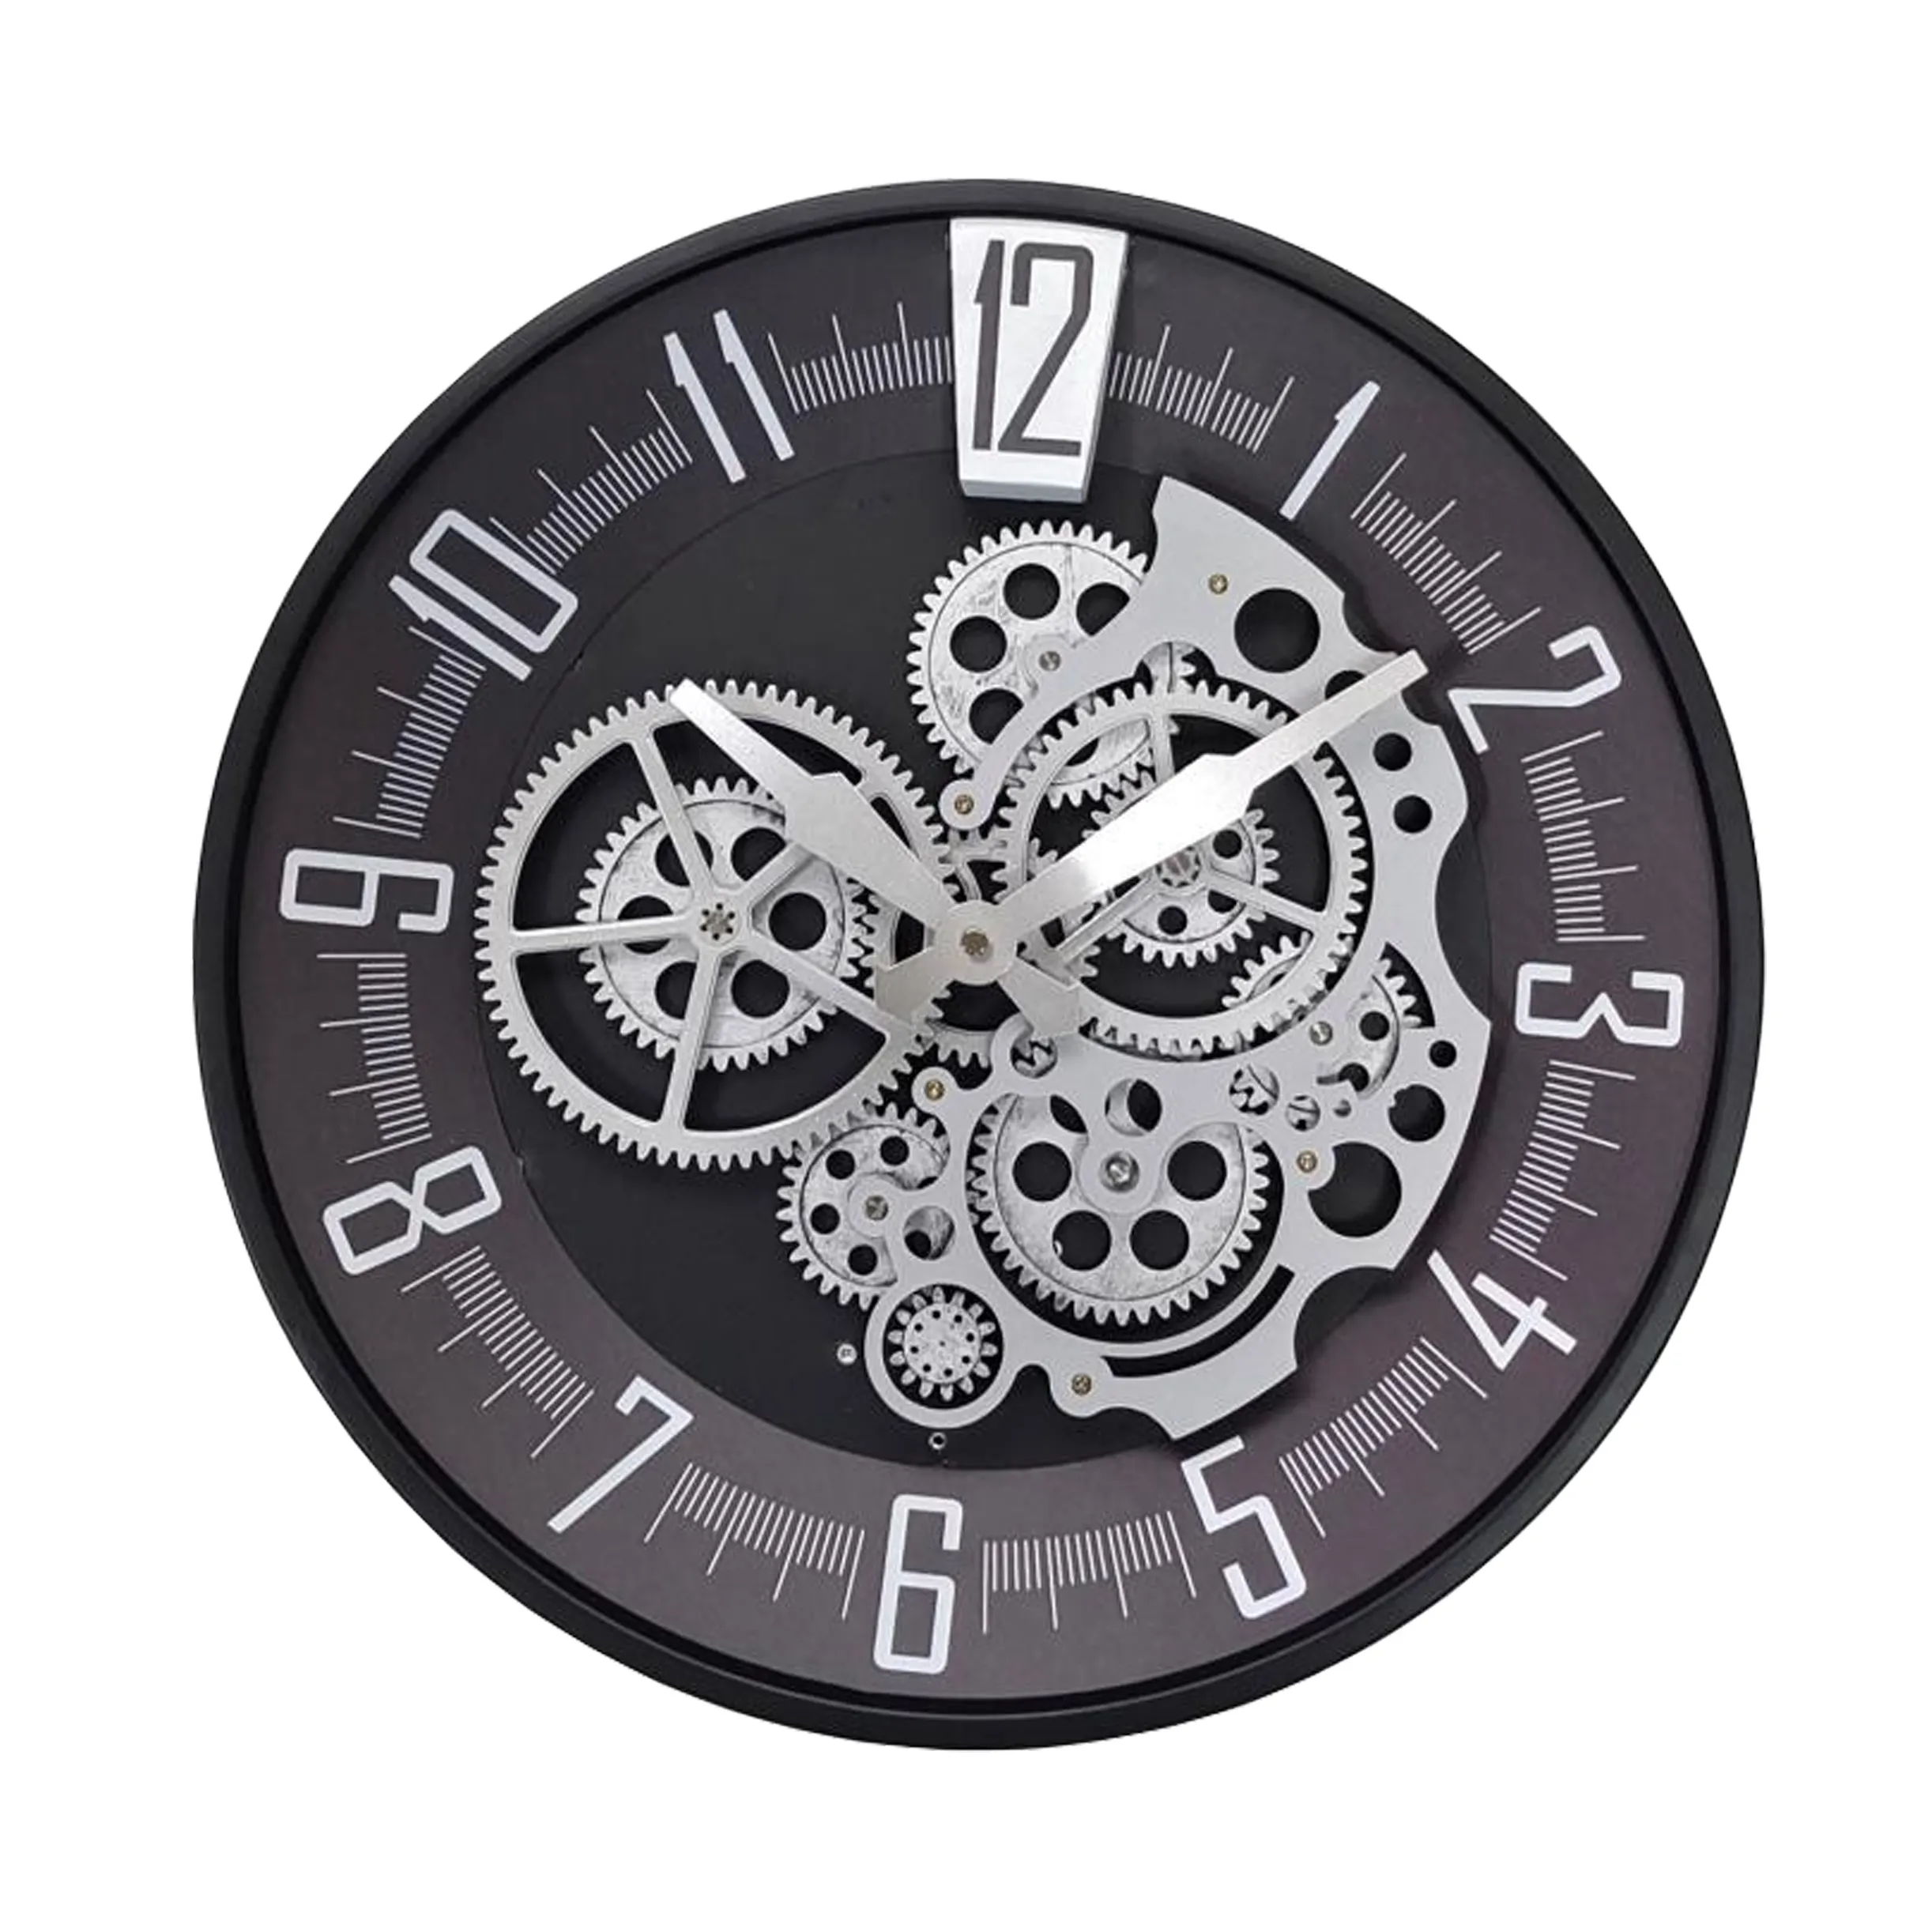 16 inch modern wall clock metal frame silver real moving gear wall clock easy to read for wall decor